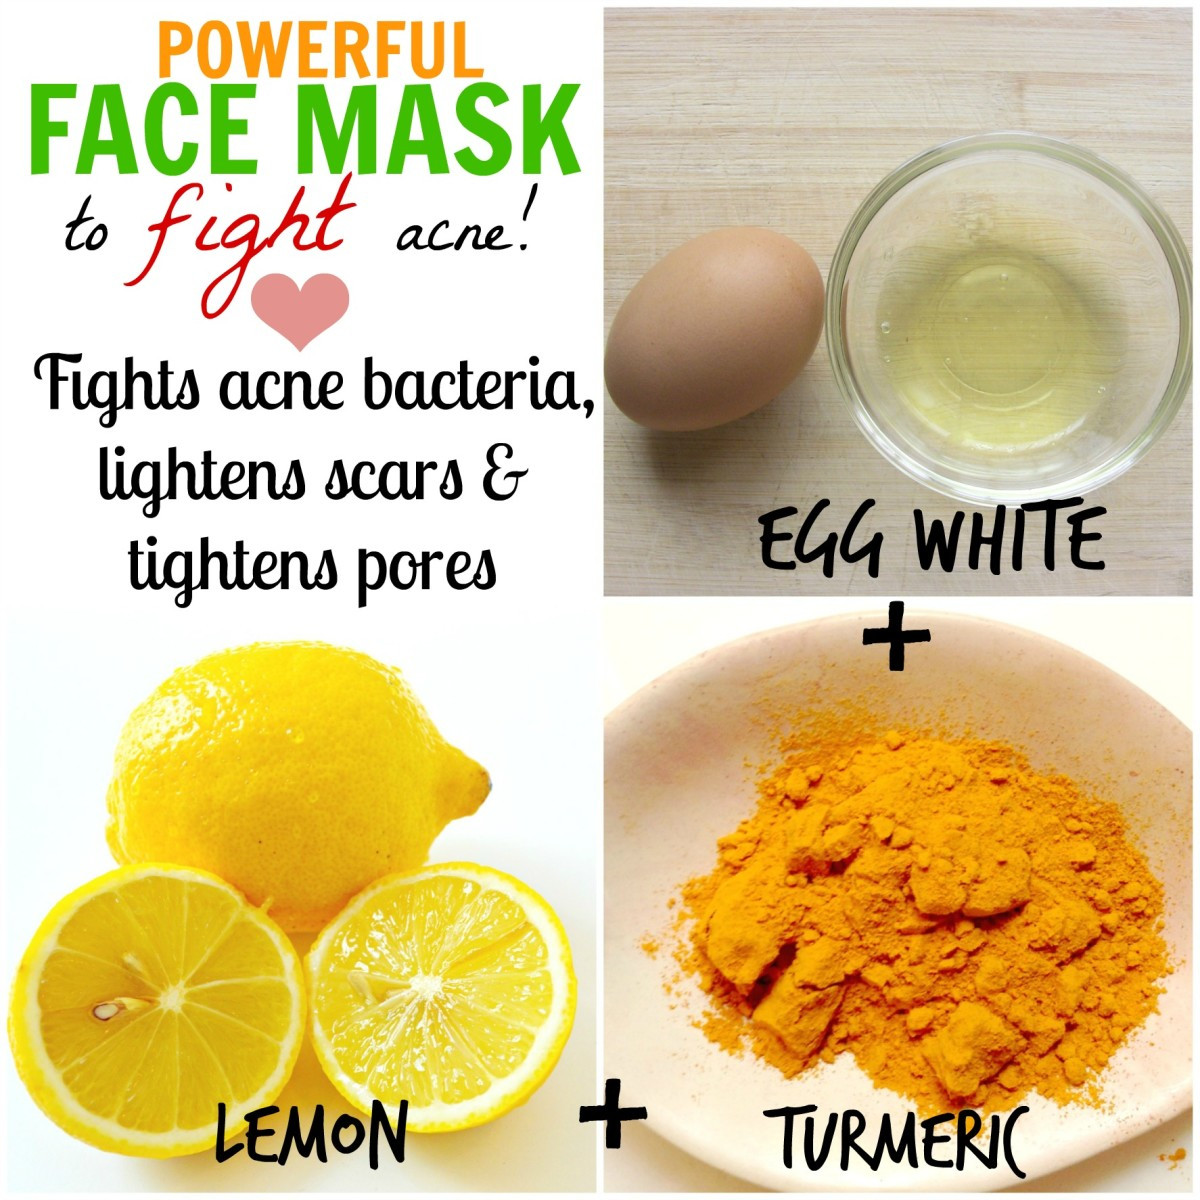 DIY Face Masks Acne
 DIY Homemade Face Masks for Acne How to Stop Pimples